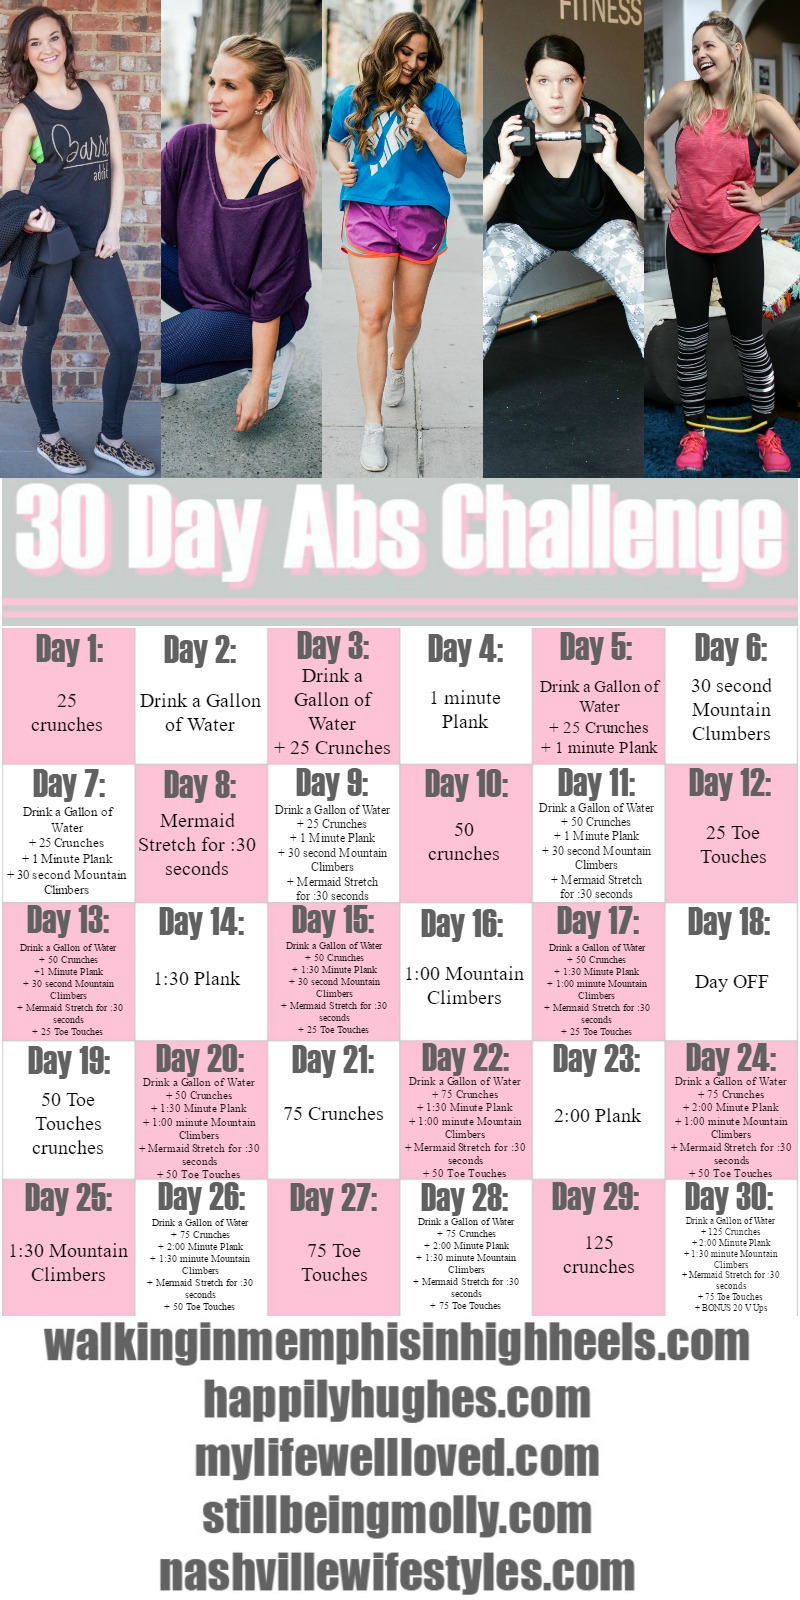 30 Day Abs Challenge